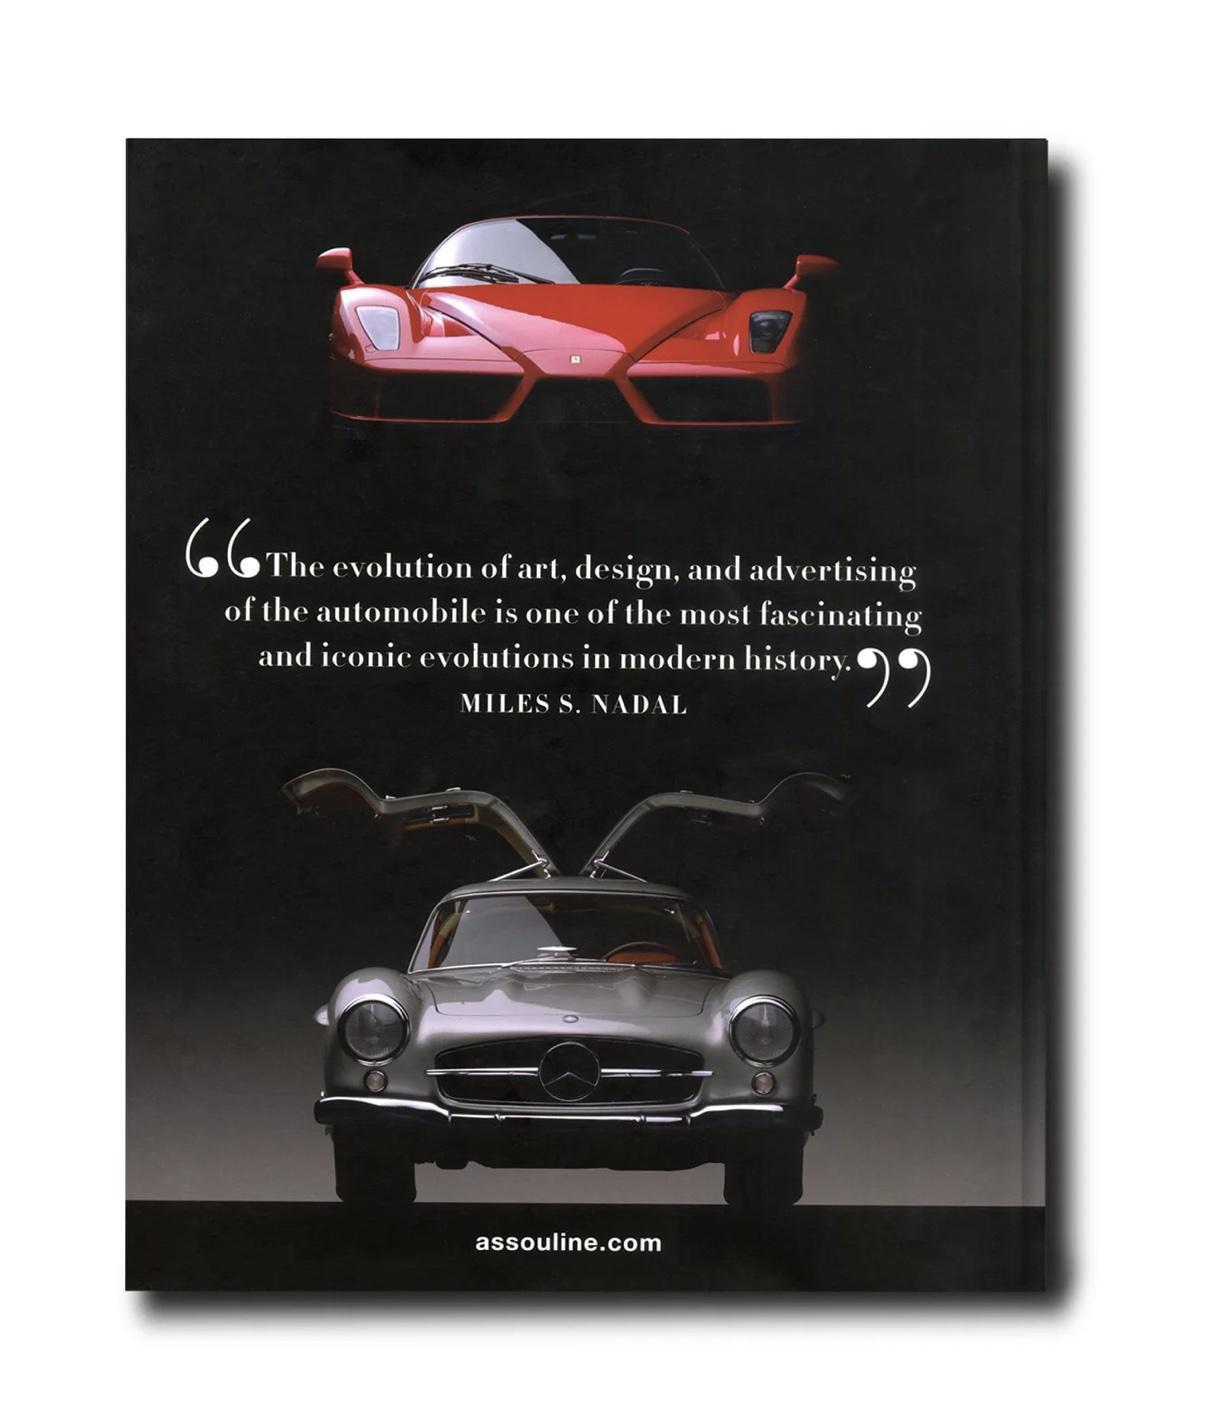 ICONIC: Art, Design, Advertising, and the Automobile